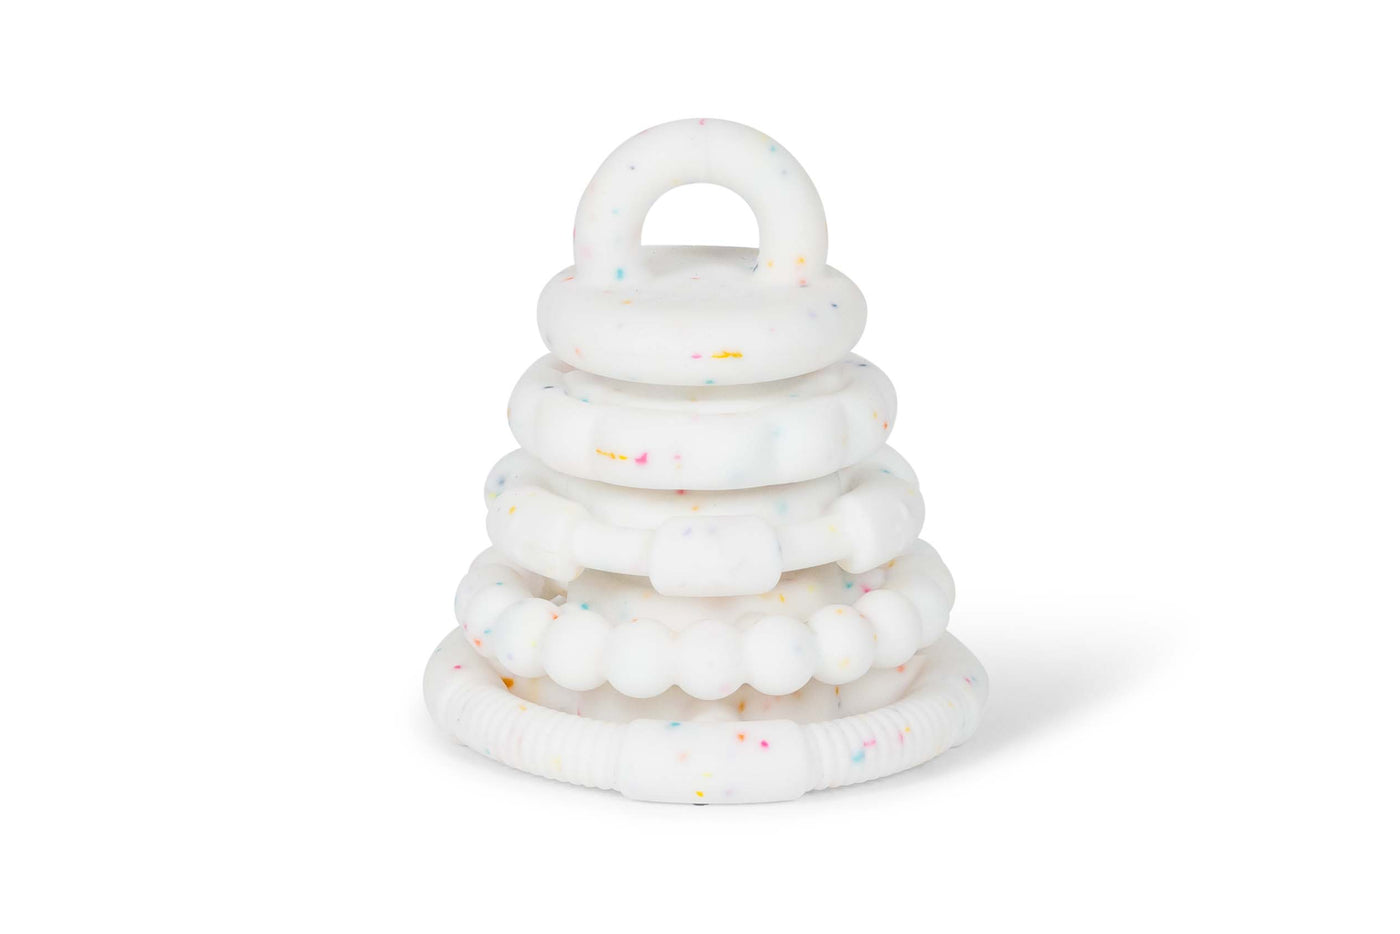 Rainbow Stacker and Teether Toy - Sprinkle